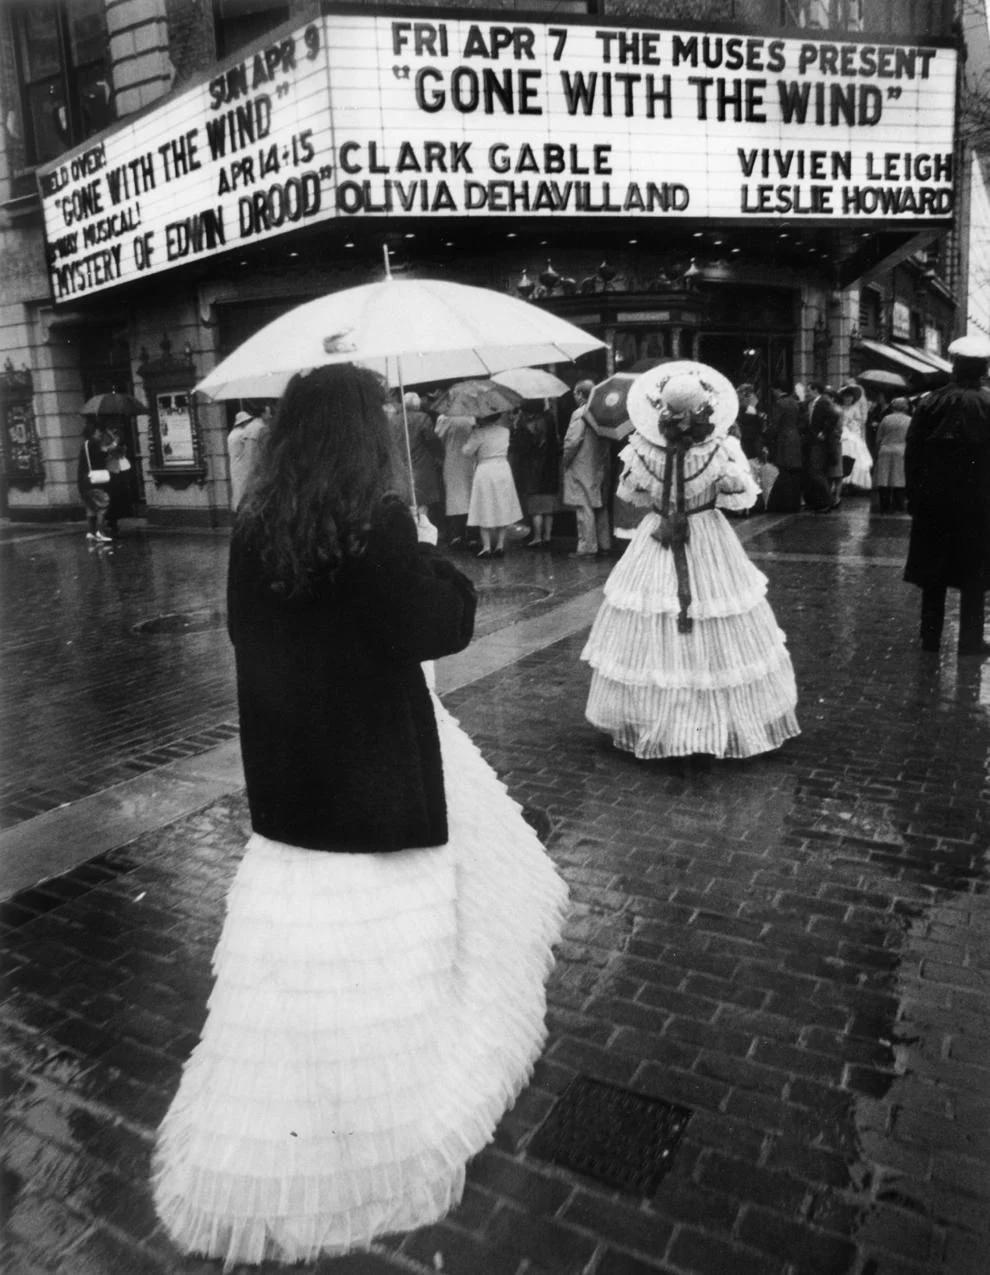 Fans of “Gone with the Wind” celebrated the film’s 50th anniversary year at a gala at the Carpenter Center in downtown Richmond, 1989